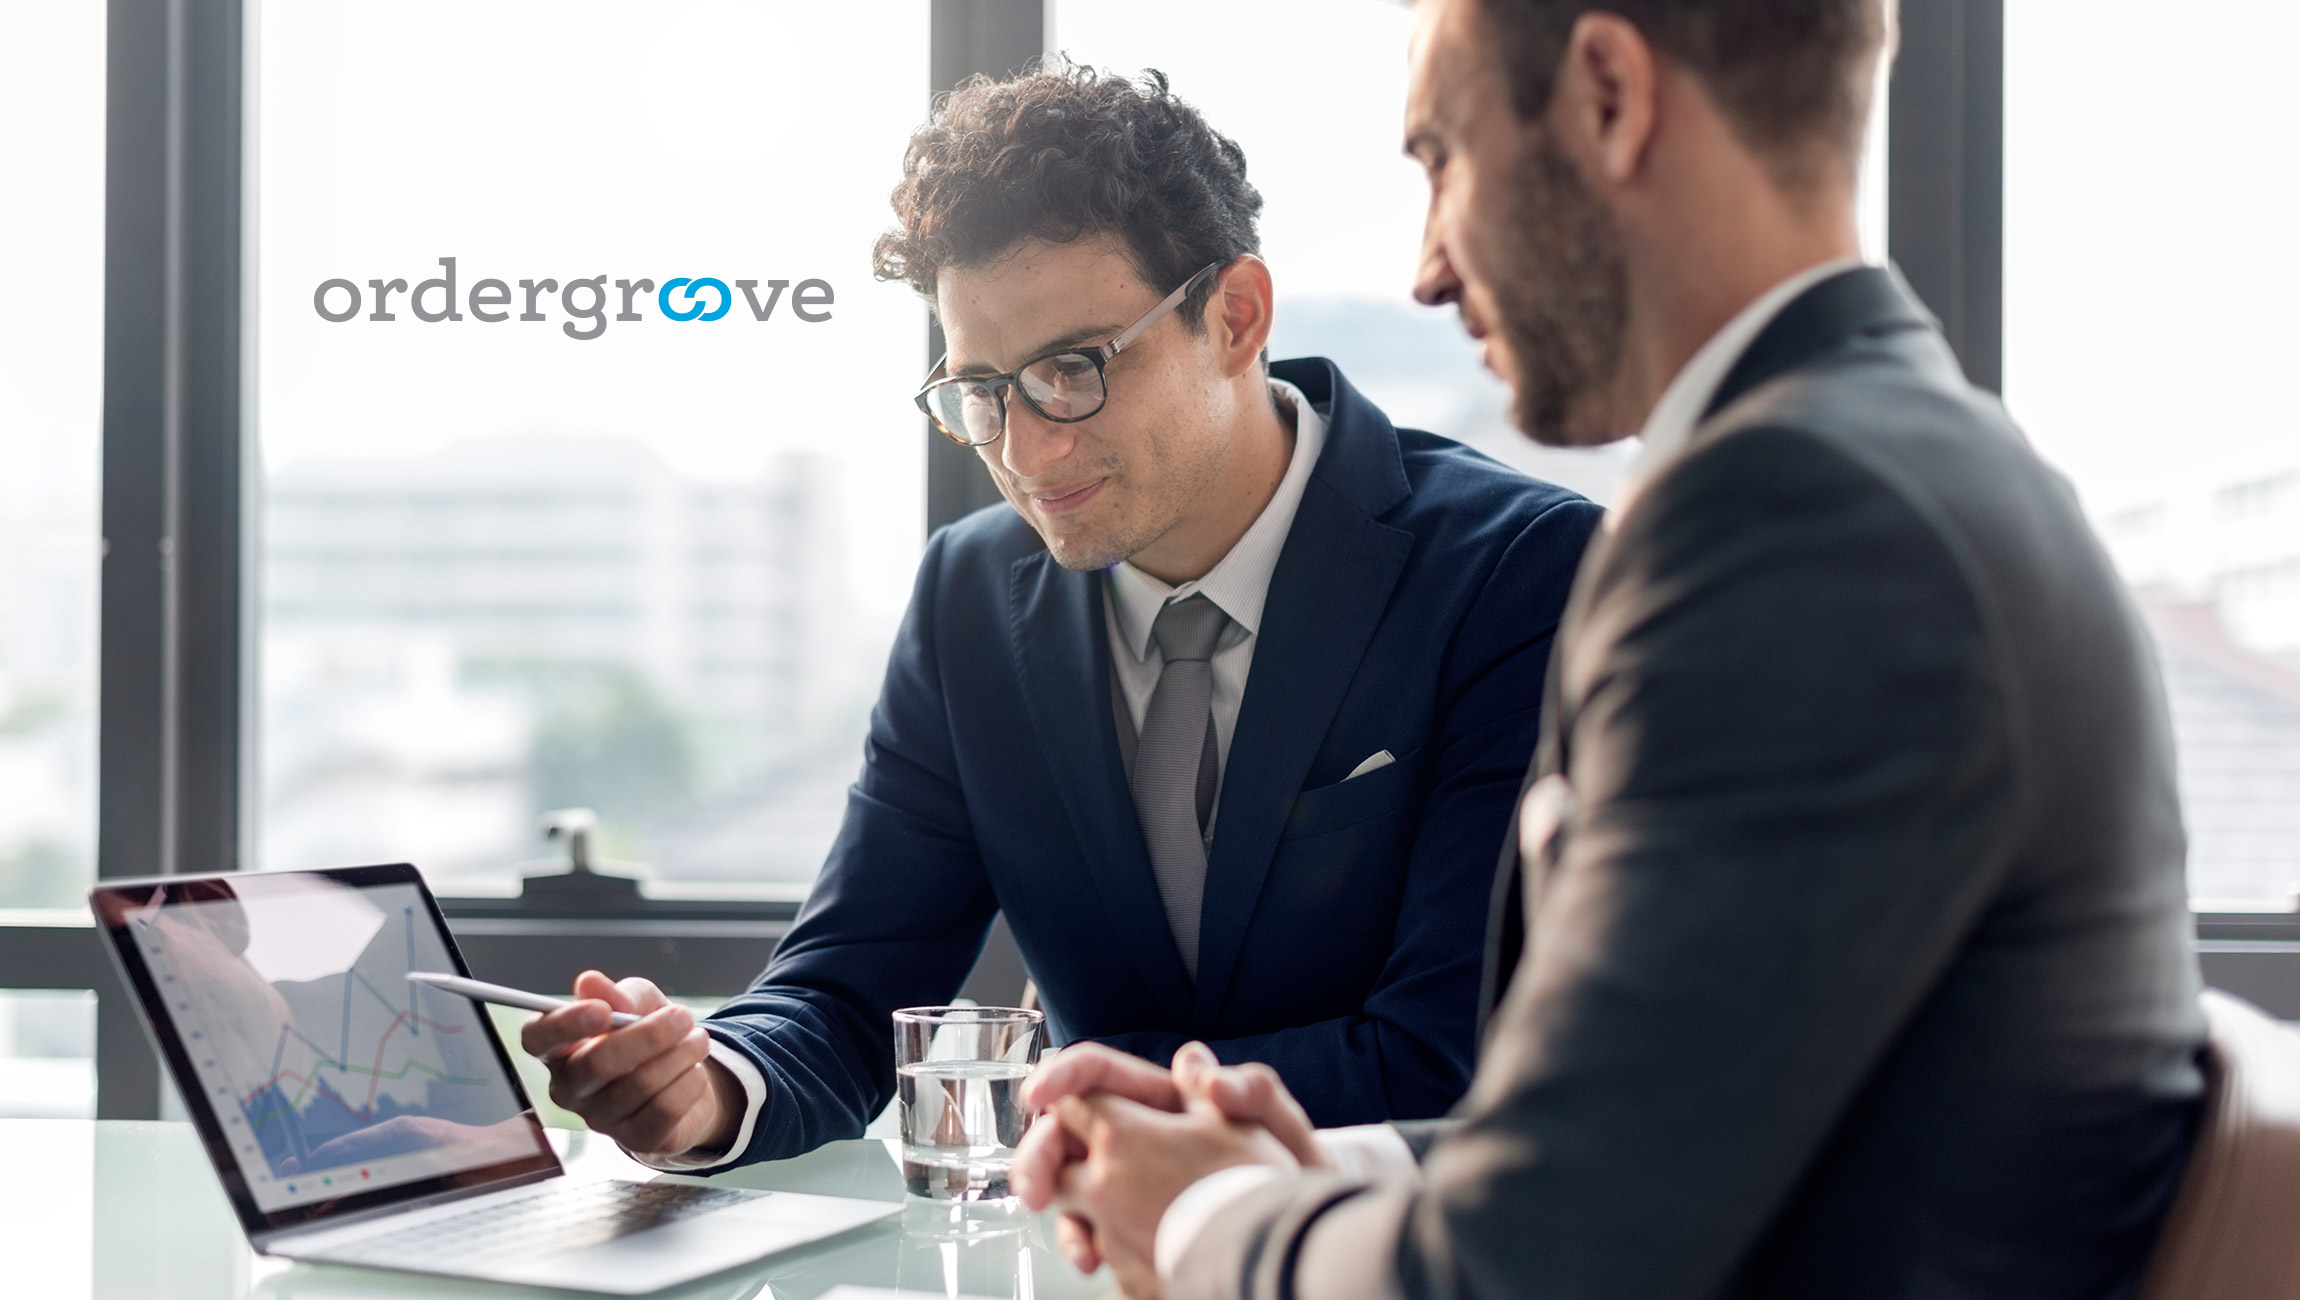 Ordergroove Raises Over $100 Million to Fuel Its Rapid Growth, Helping Brands and Retailers Increase Customer Lifetime Value and Generate Recurring Revenue